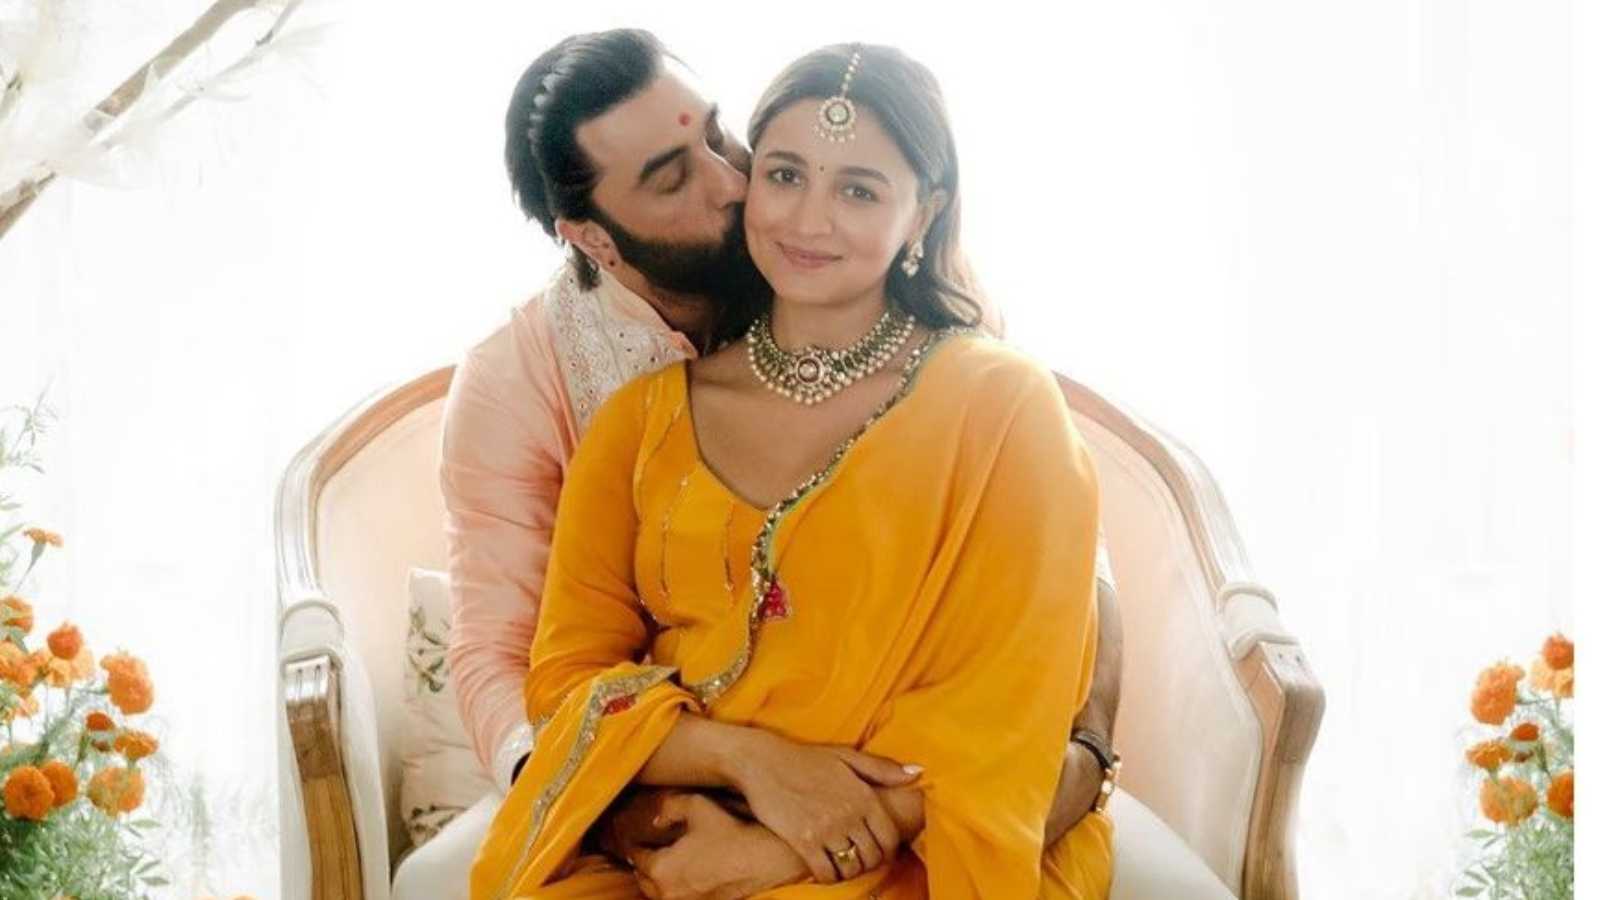 Parents-to-be Alia Bhatt and Ranbir Kapoor can't keep their hands off one another in these pictures from their intimate baby shower